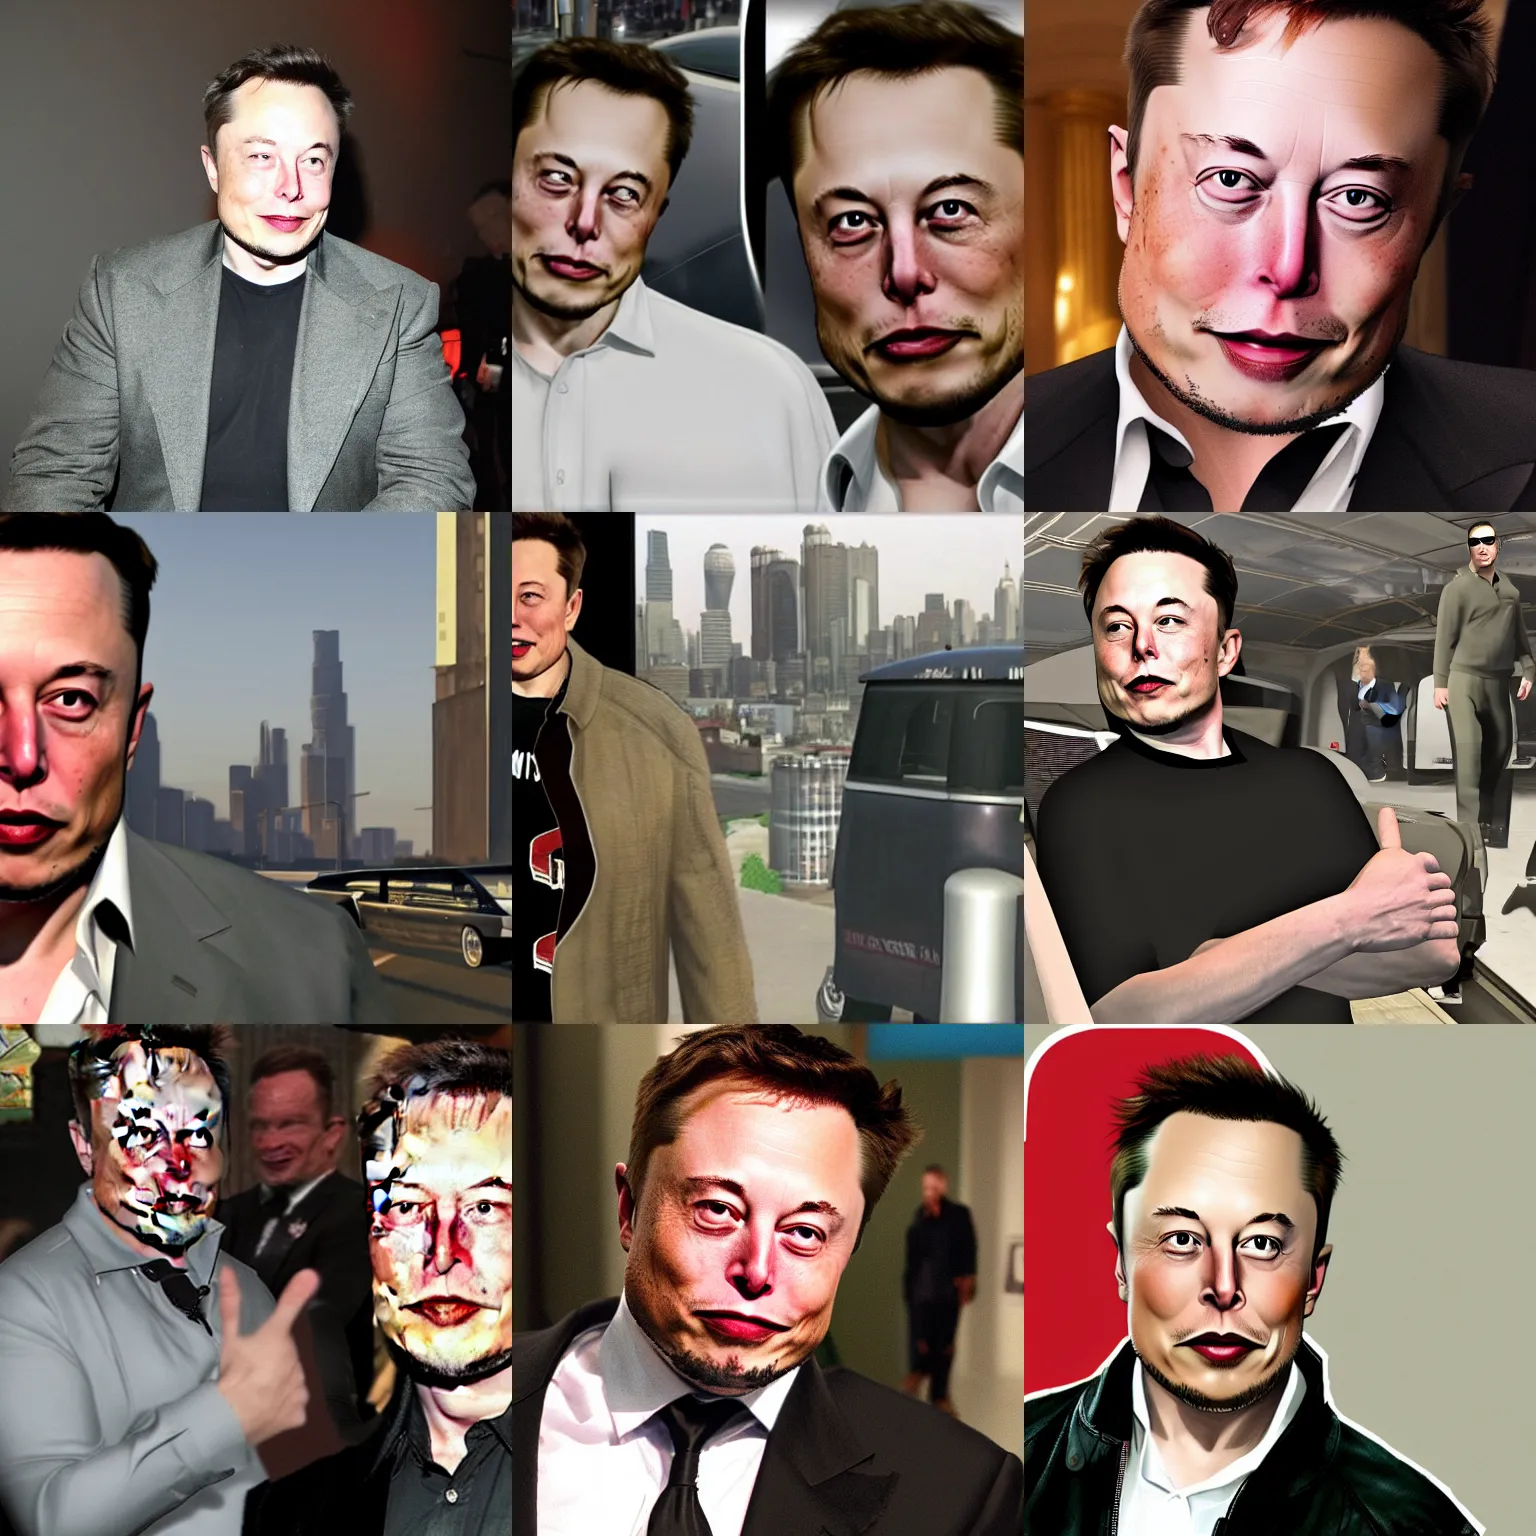 Prompt: elon musk wild appearance on gta iv party